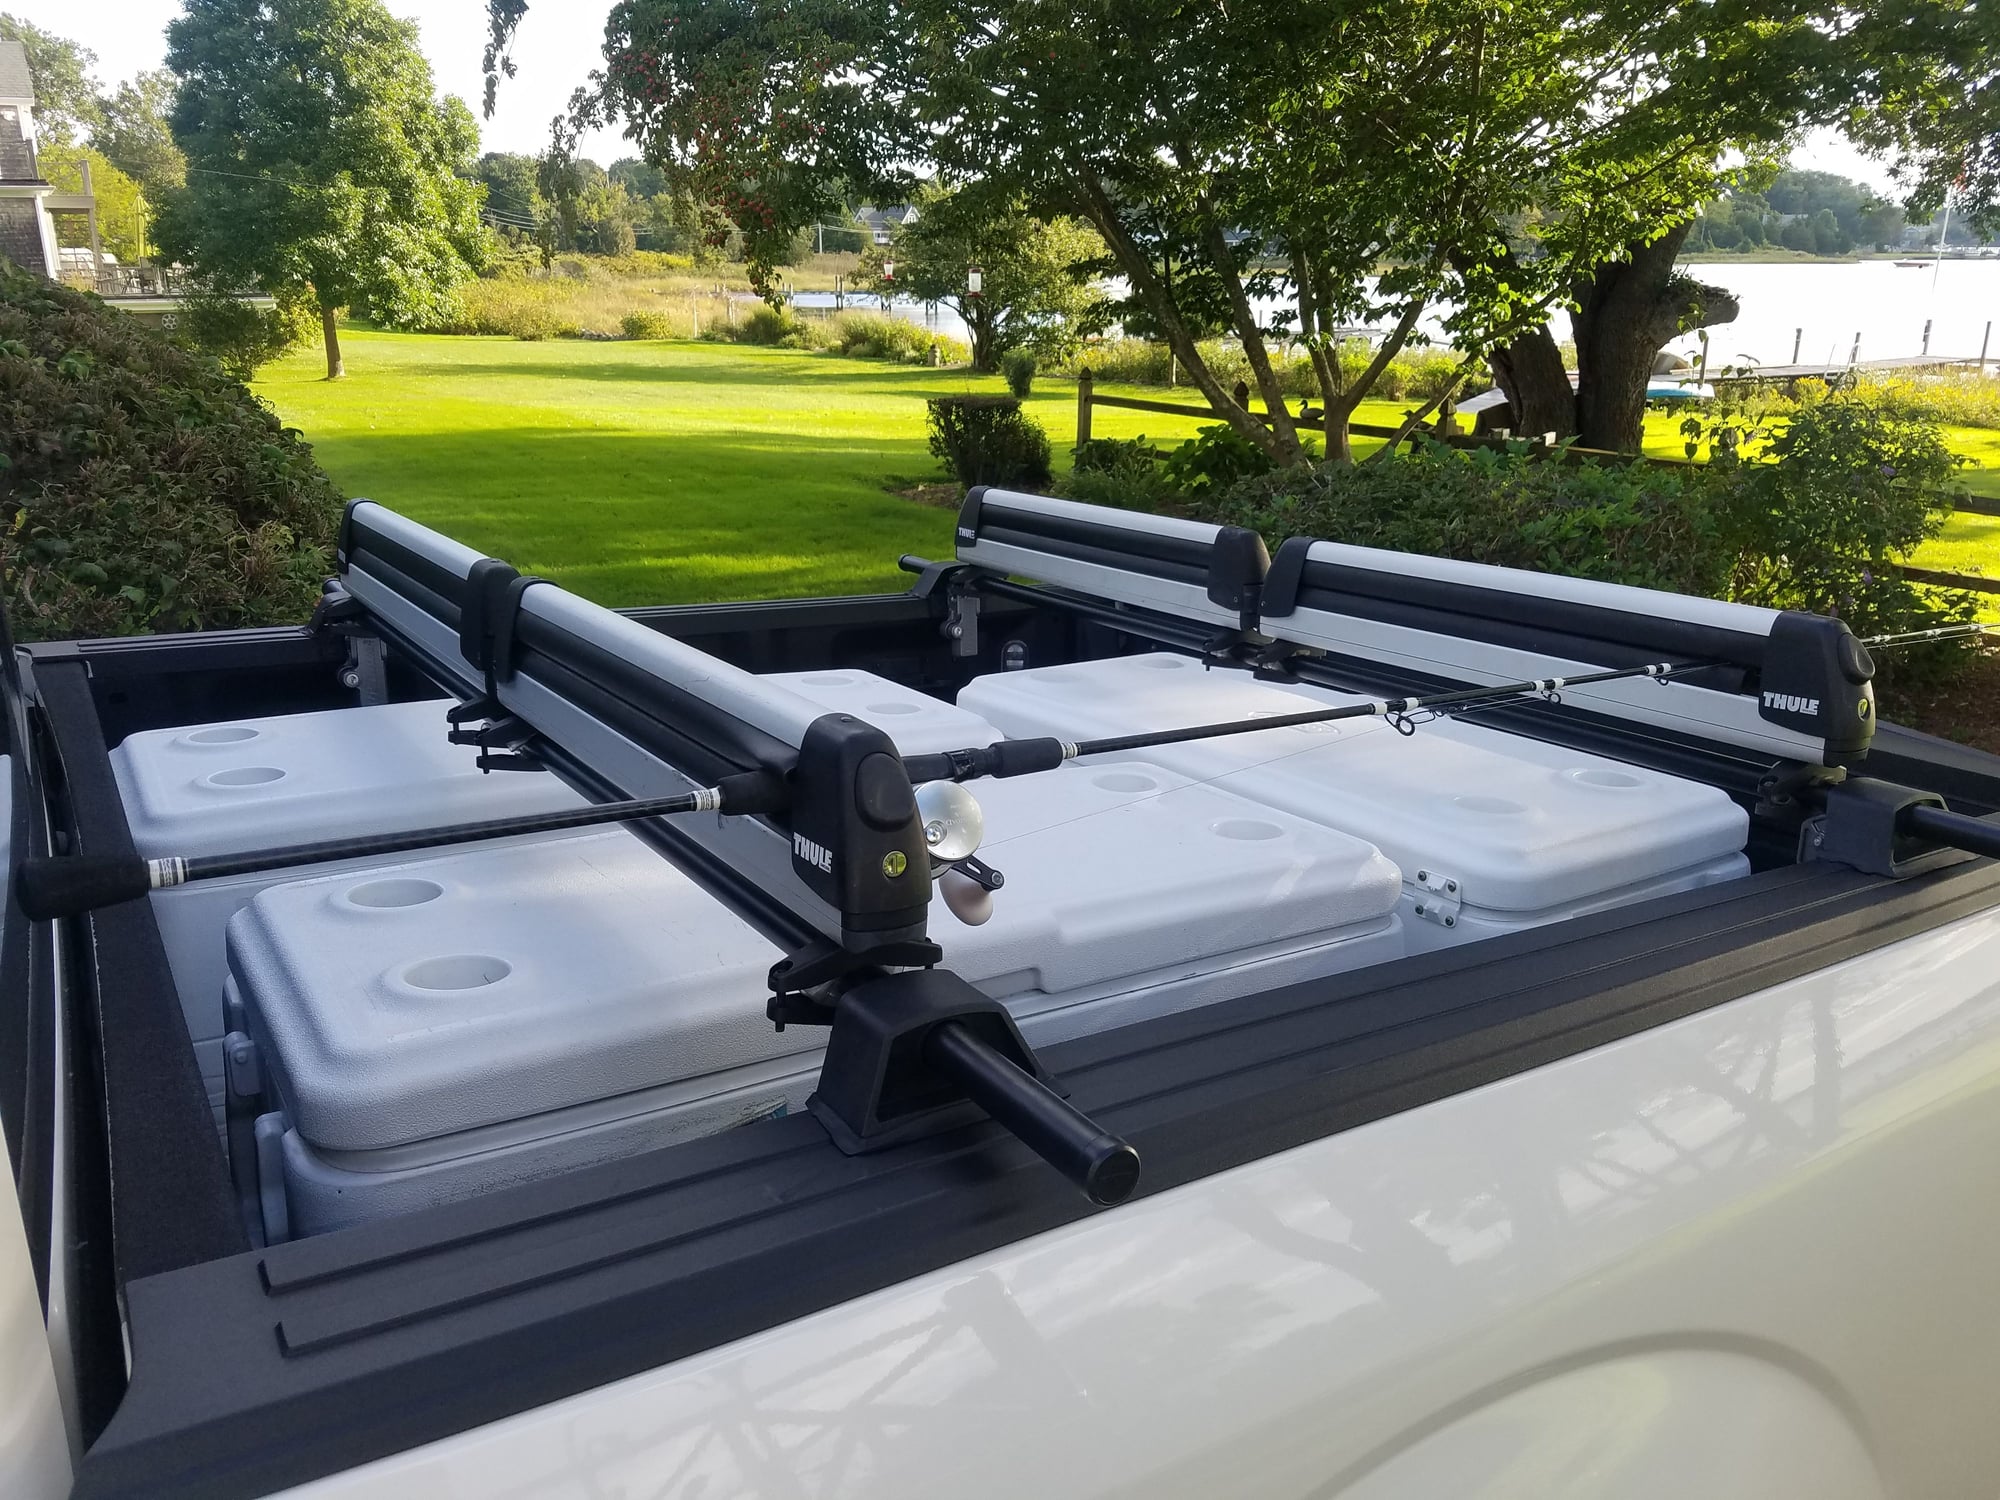 Truck Rod Racks? - Page 2 - The Hull Truth - Boating and Fishing Forum